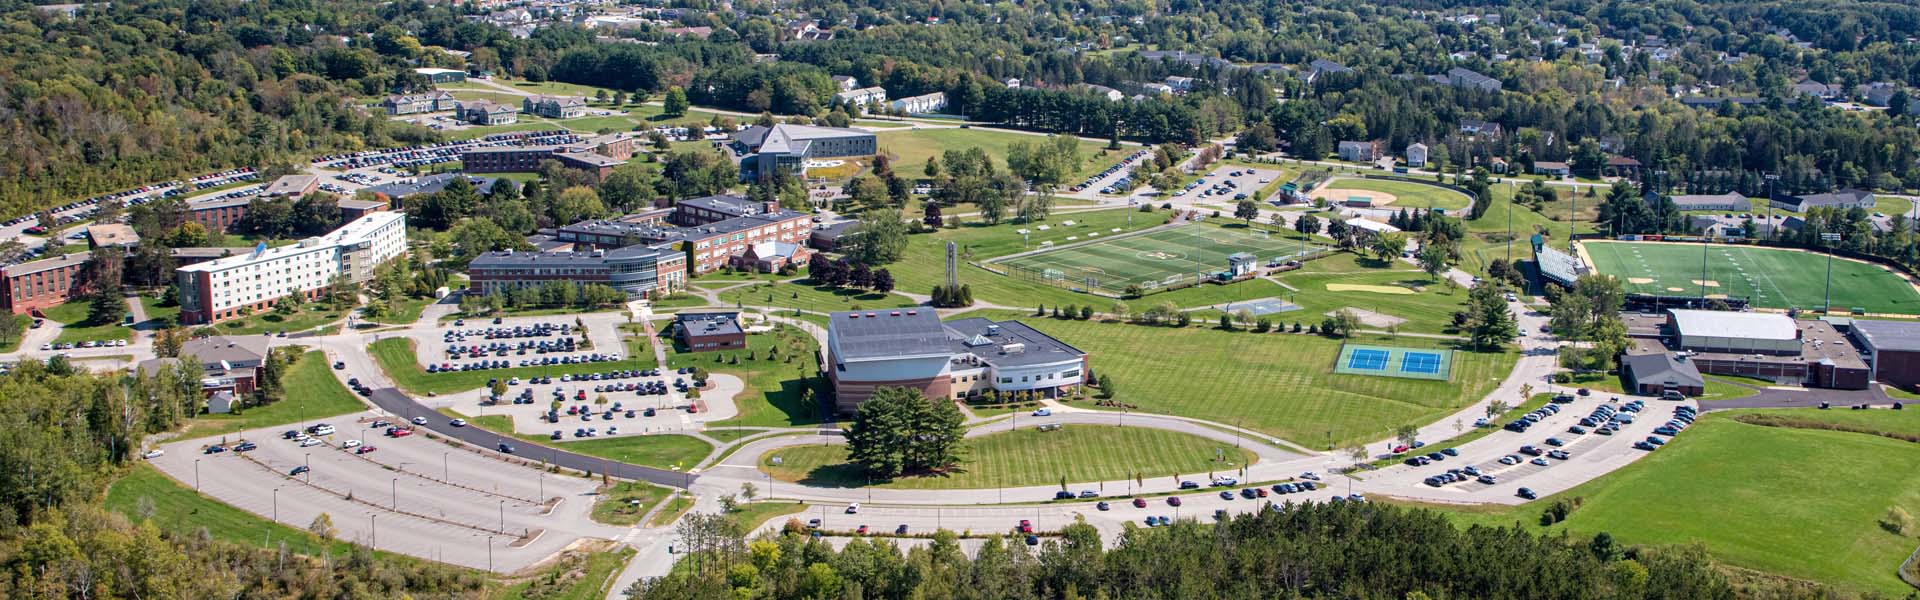 An aerial image of the Husson University campus